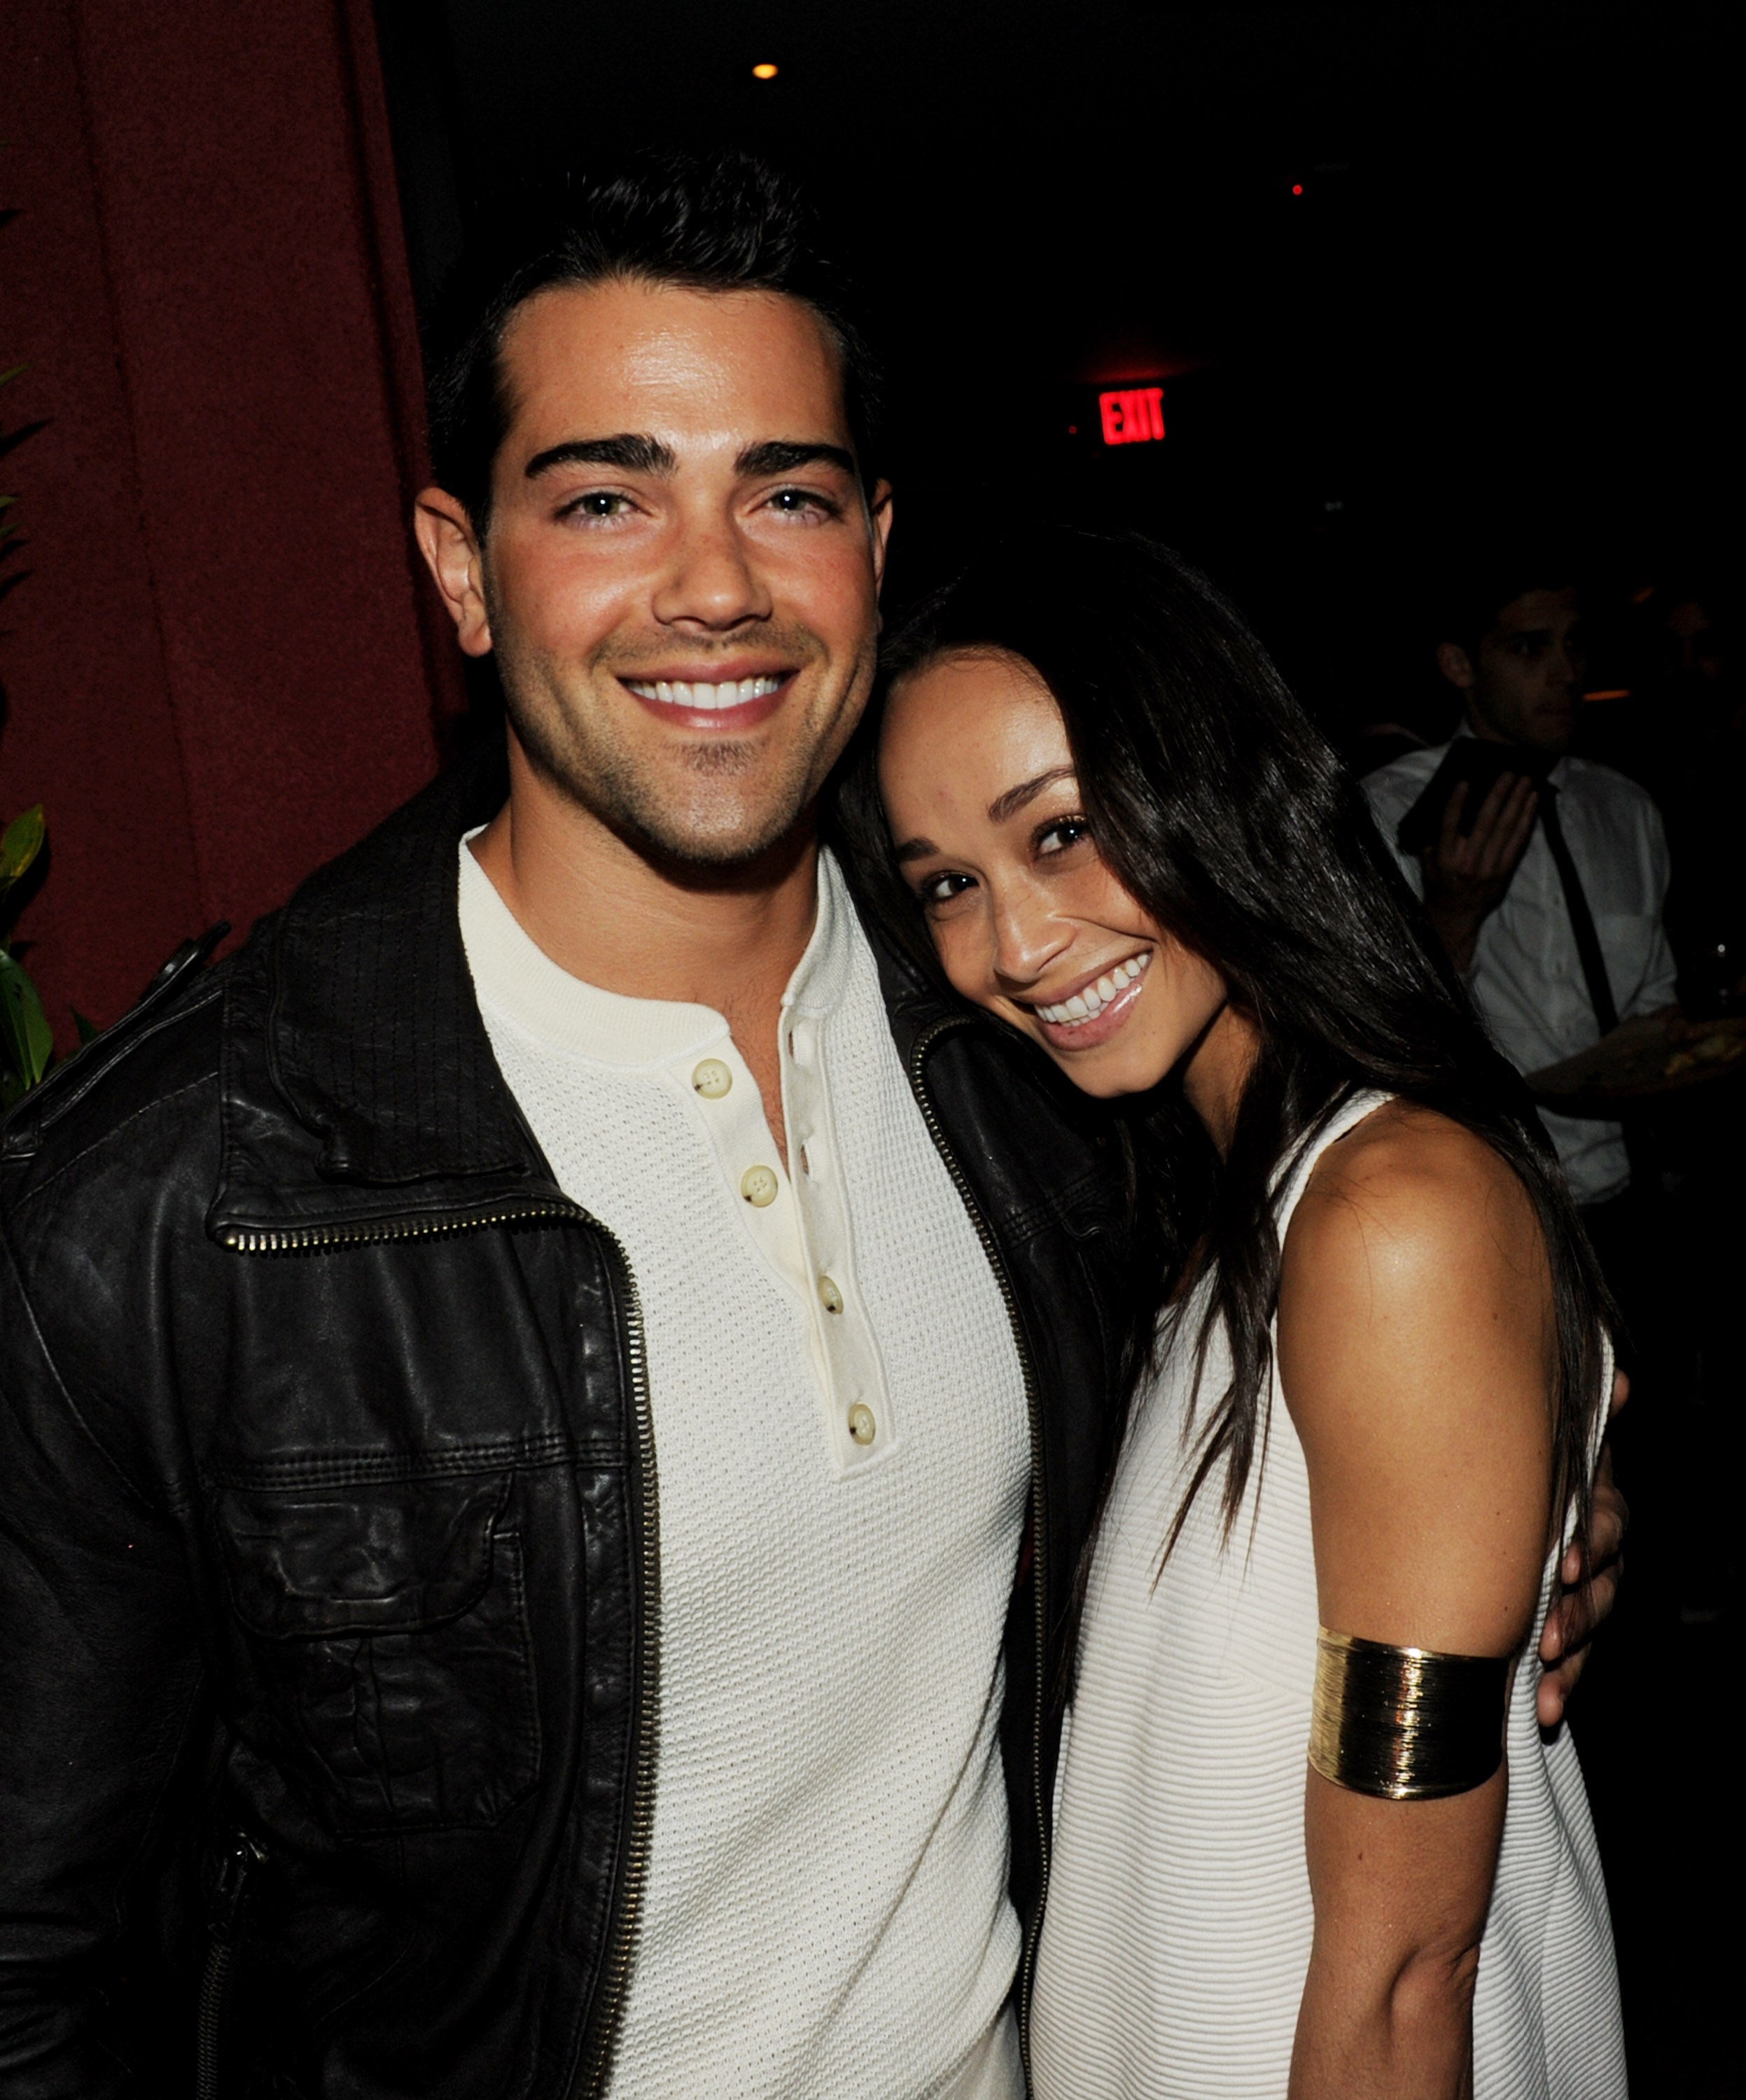 Jesse Metcalfe and Cara Santana pose at the after party for the premiere of The Weinstein Company's "Scream 4" Presented by AXE Shower at The Redbury Hotel on April 11, 2011, in Los Angeles, California | Source: Getty Images